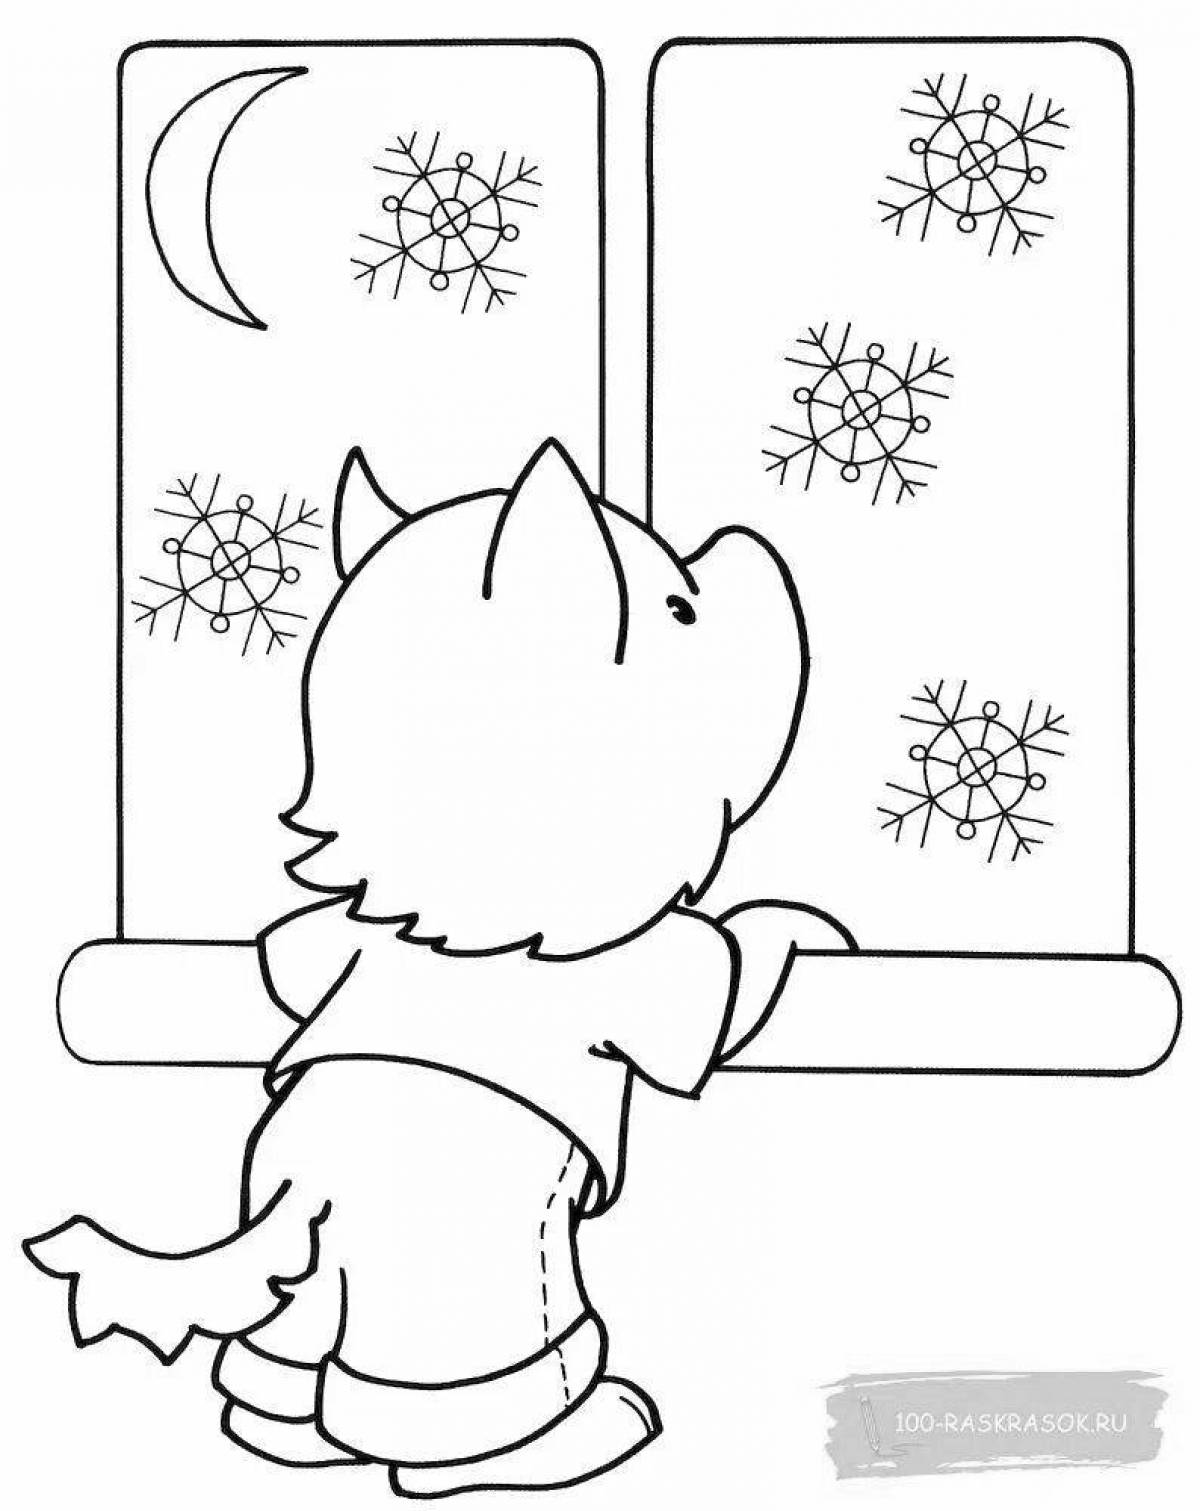 Great window coloring page for kids